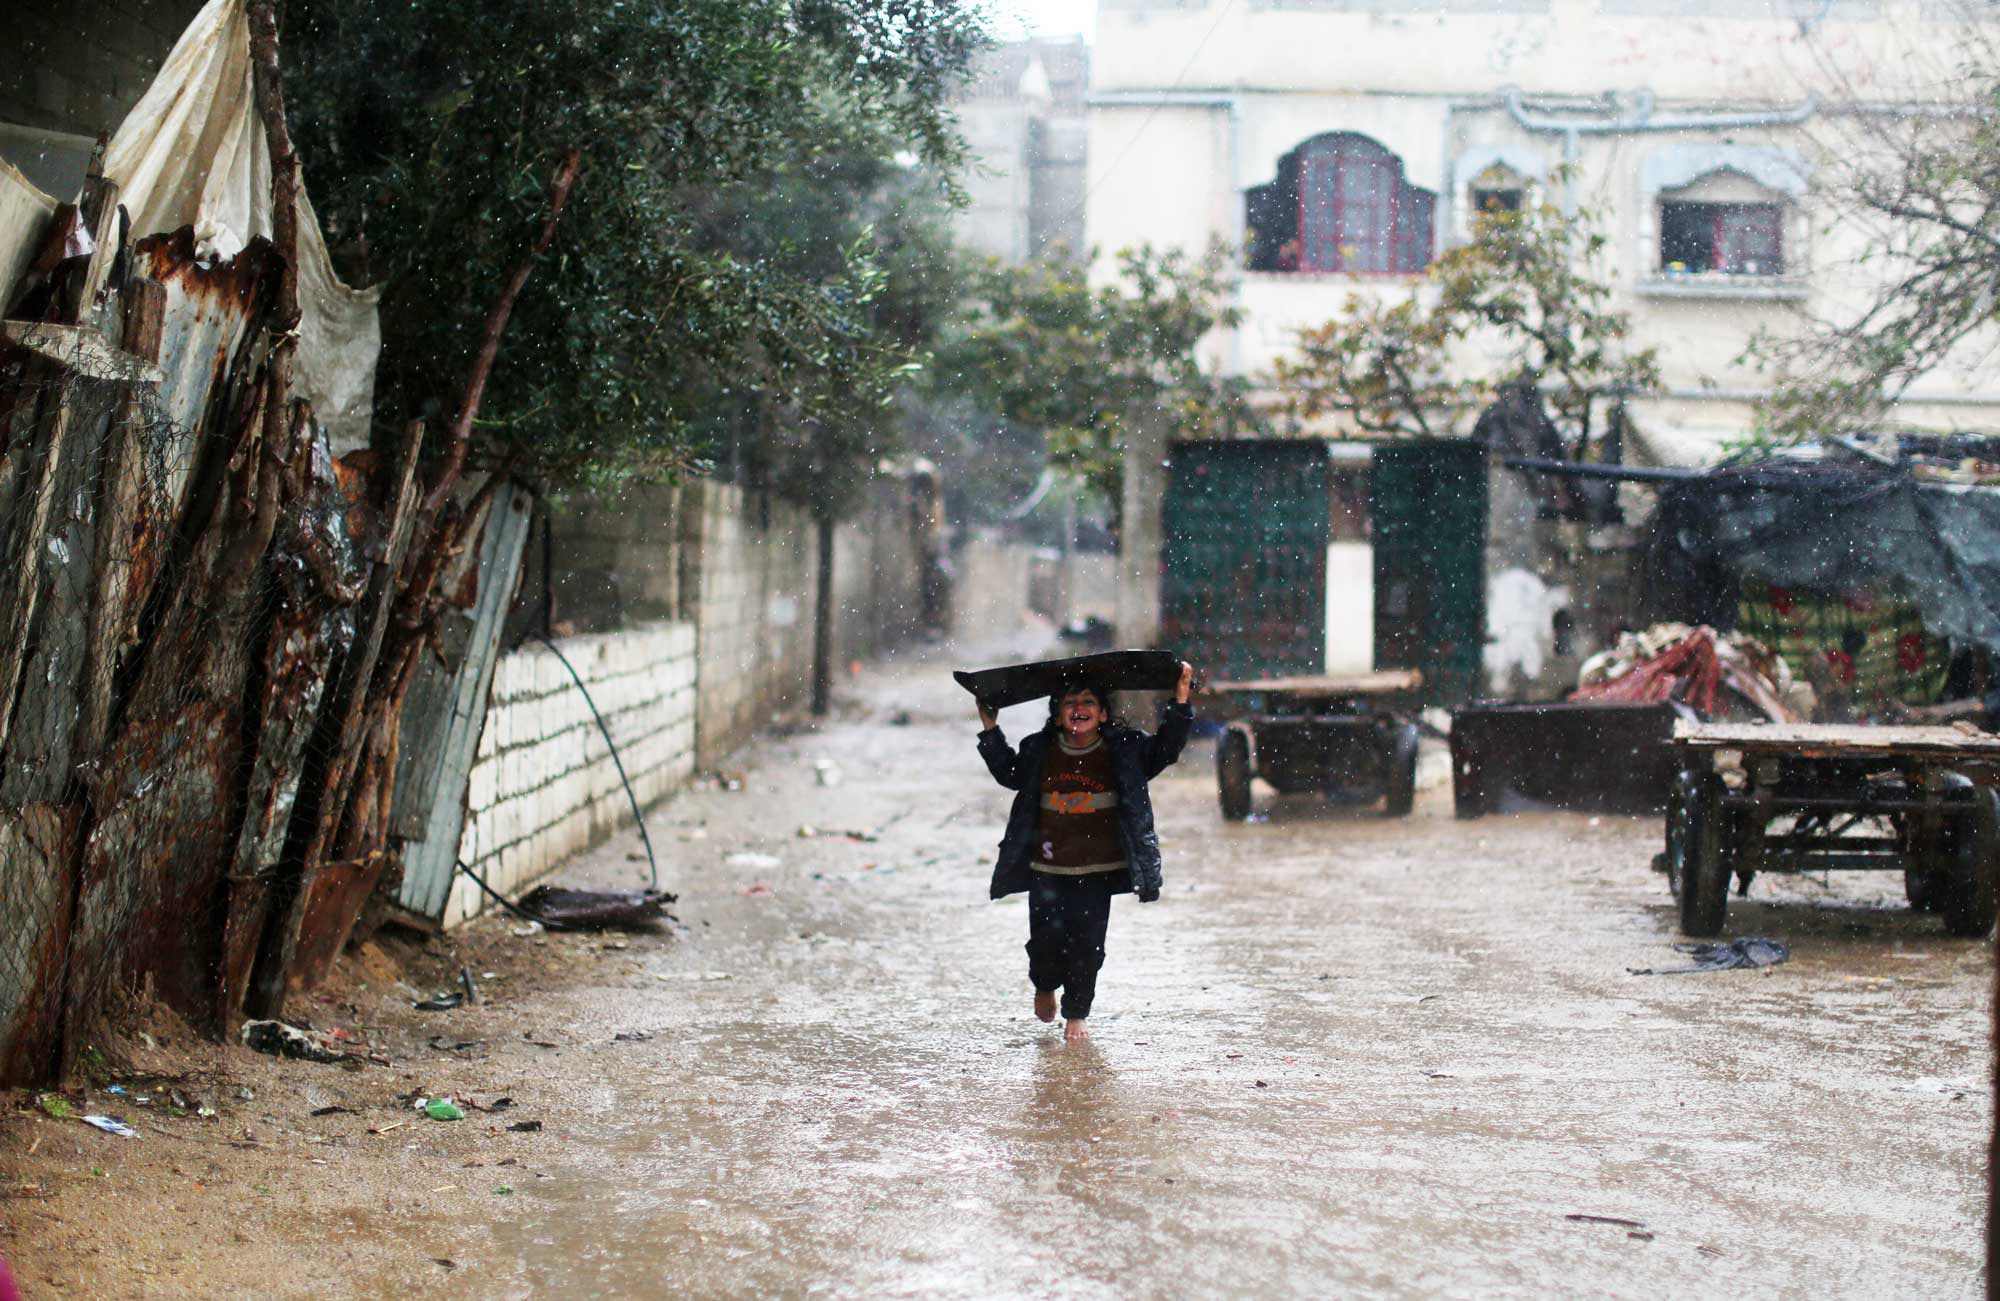 A Gaza child walks flooded streets with a board over her head, natural disasters are a problem as well as post conflict reconstruction.